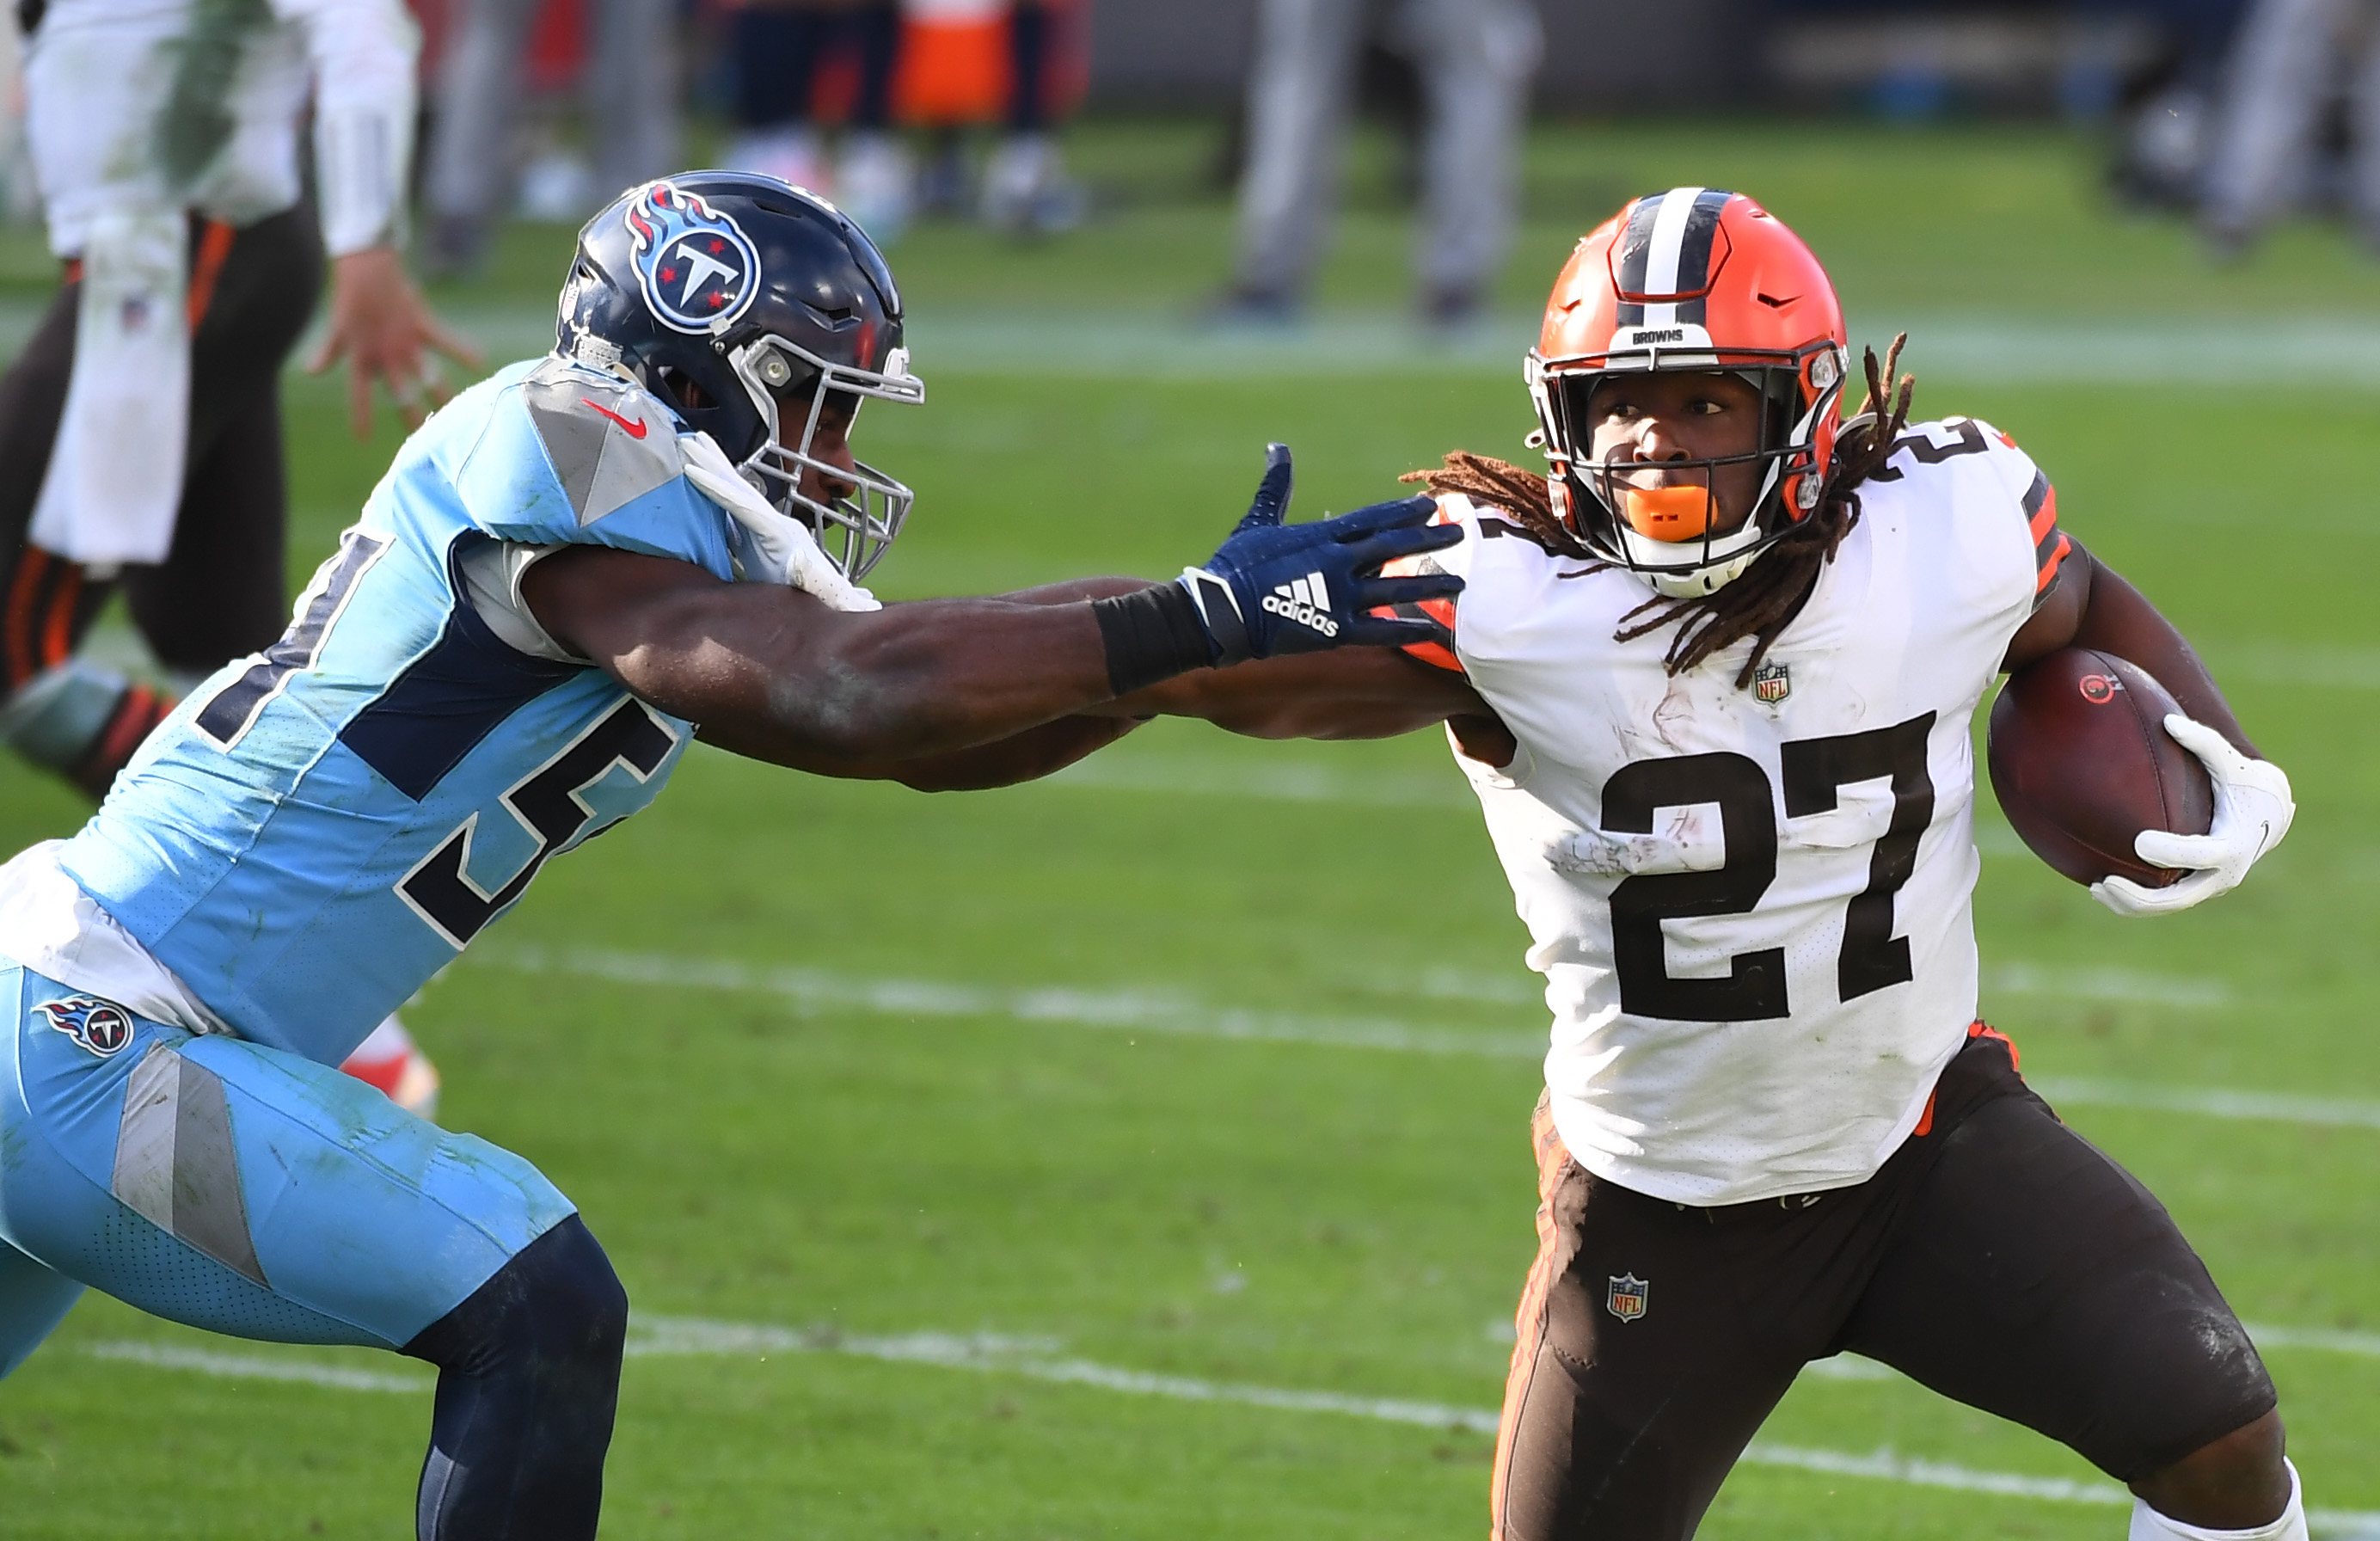 Cleveland Browns running back Kareem Hunt (27) fights off a tackle attempt from Tennessee Titans inside linebacker Rashaan Evans (54) during the second half at Nissan Stadium.